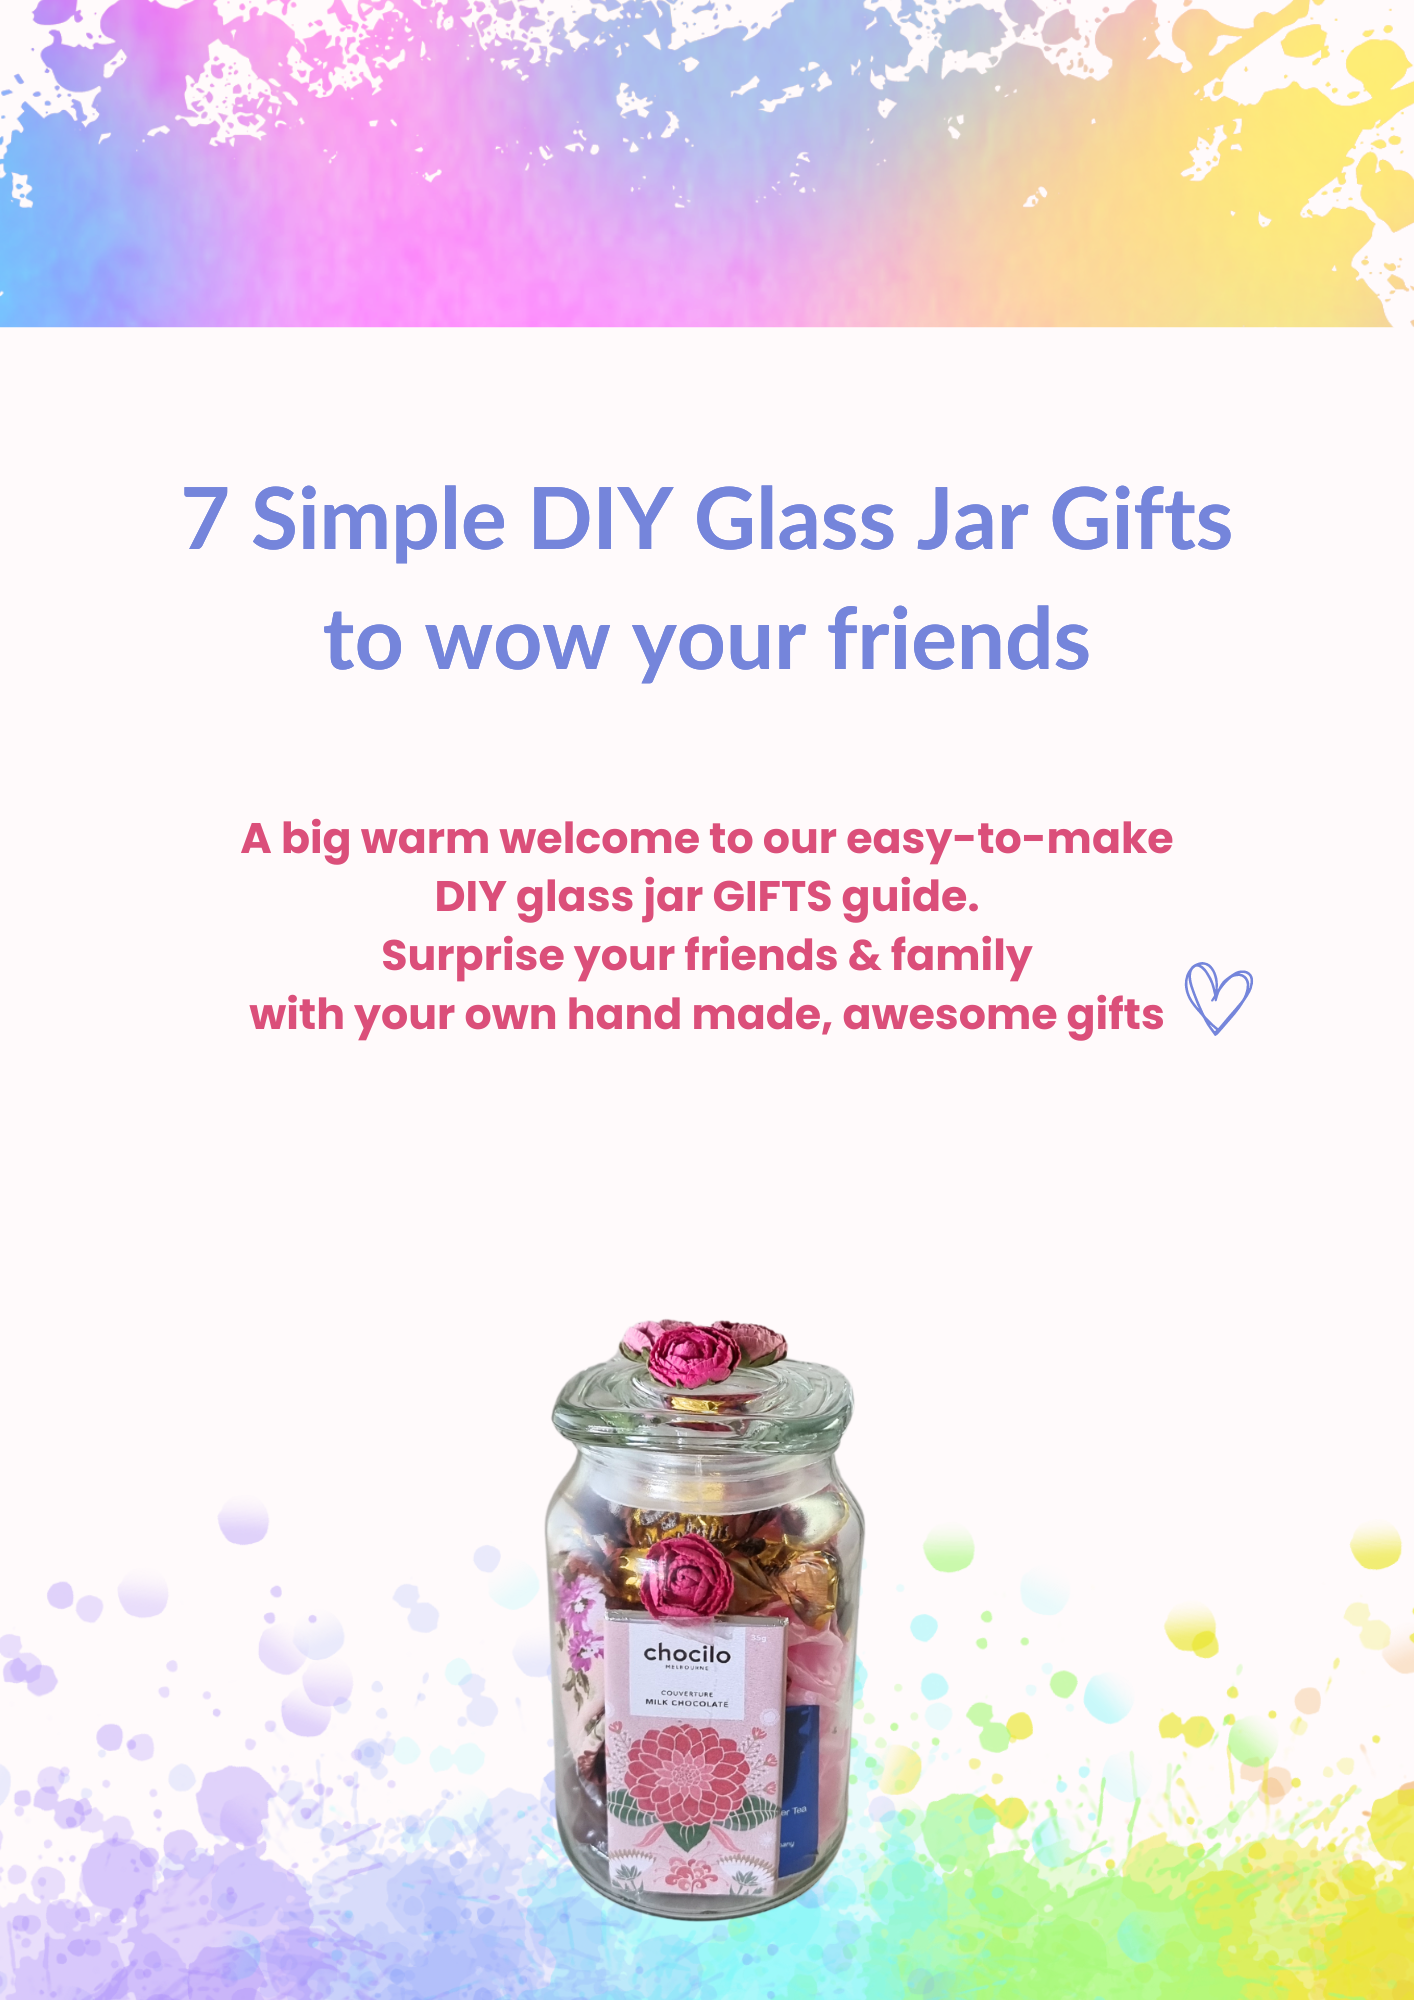 Twizzle-Designs-7-simple-DIY-Glass-Jar-Gifts-to-make-for-friends-booklet